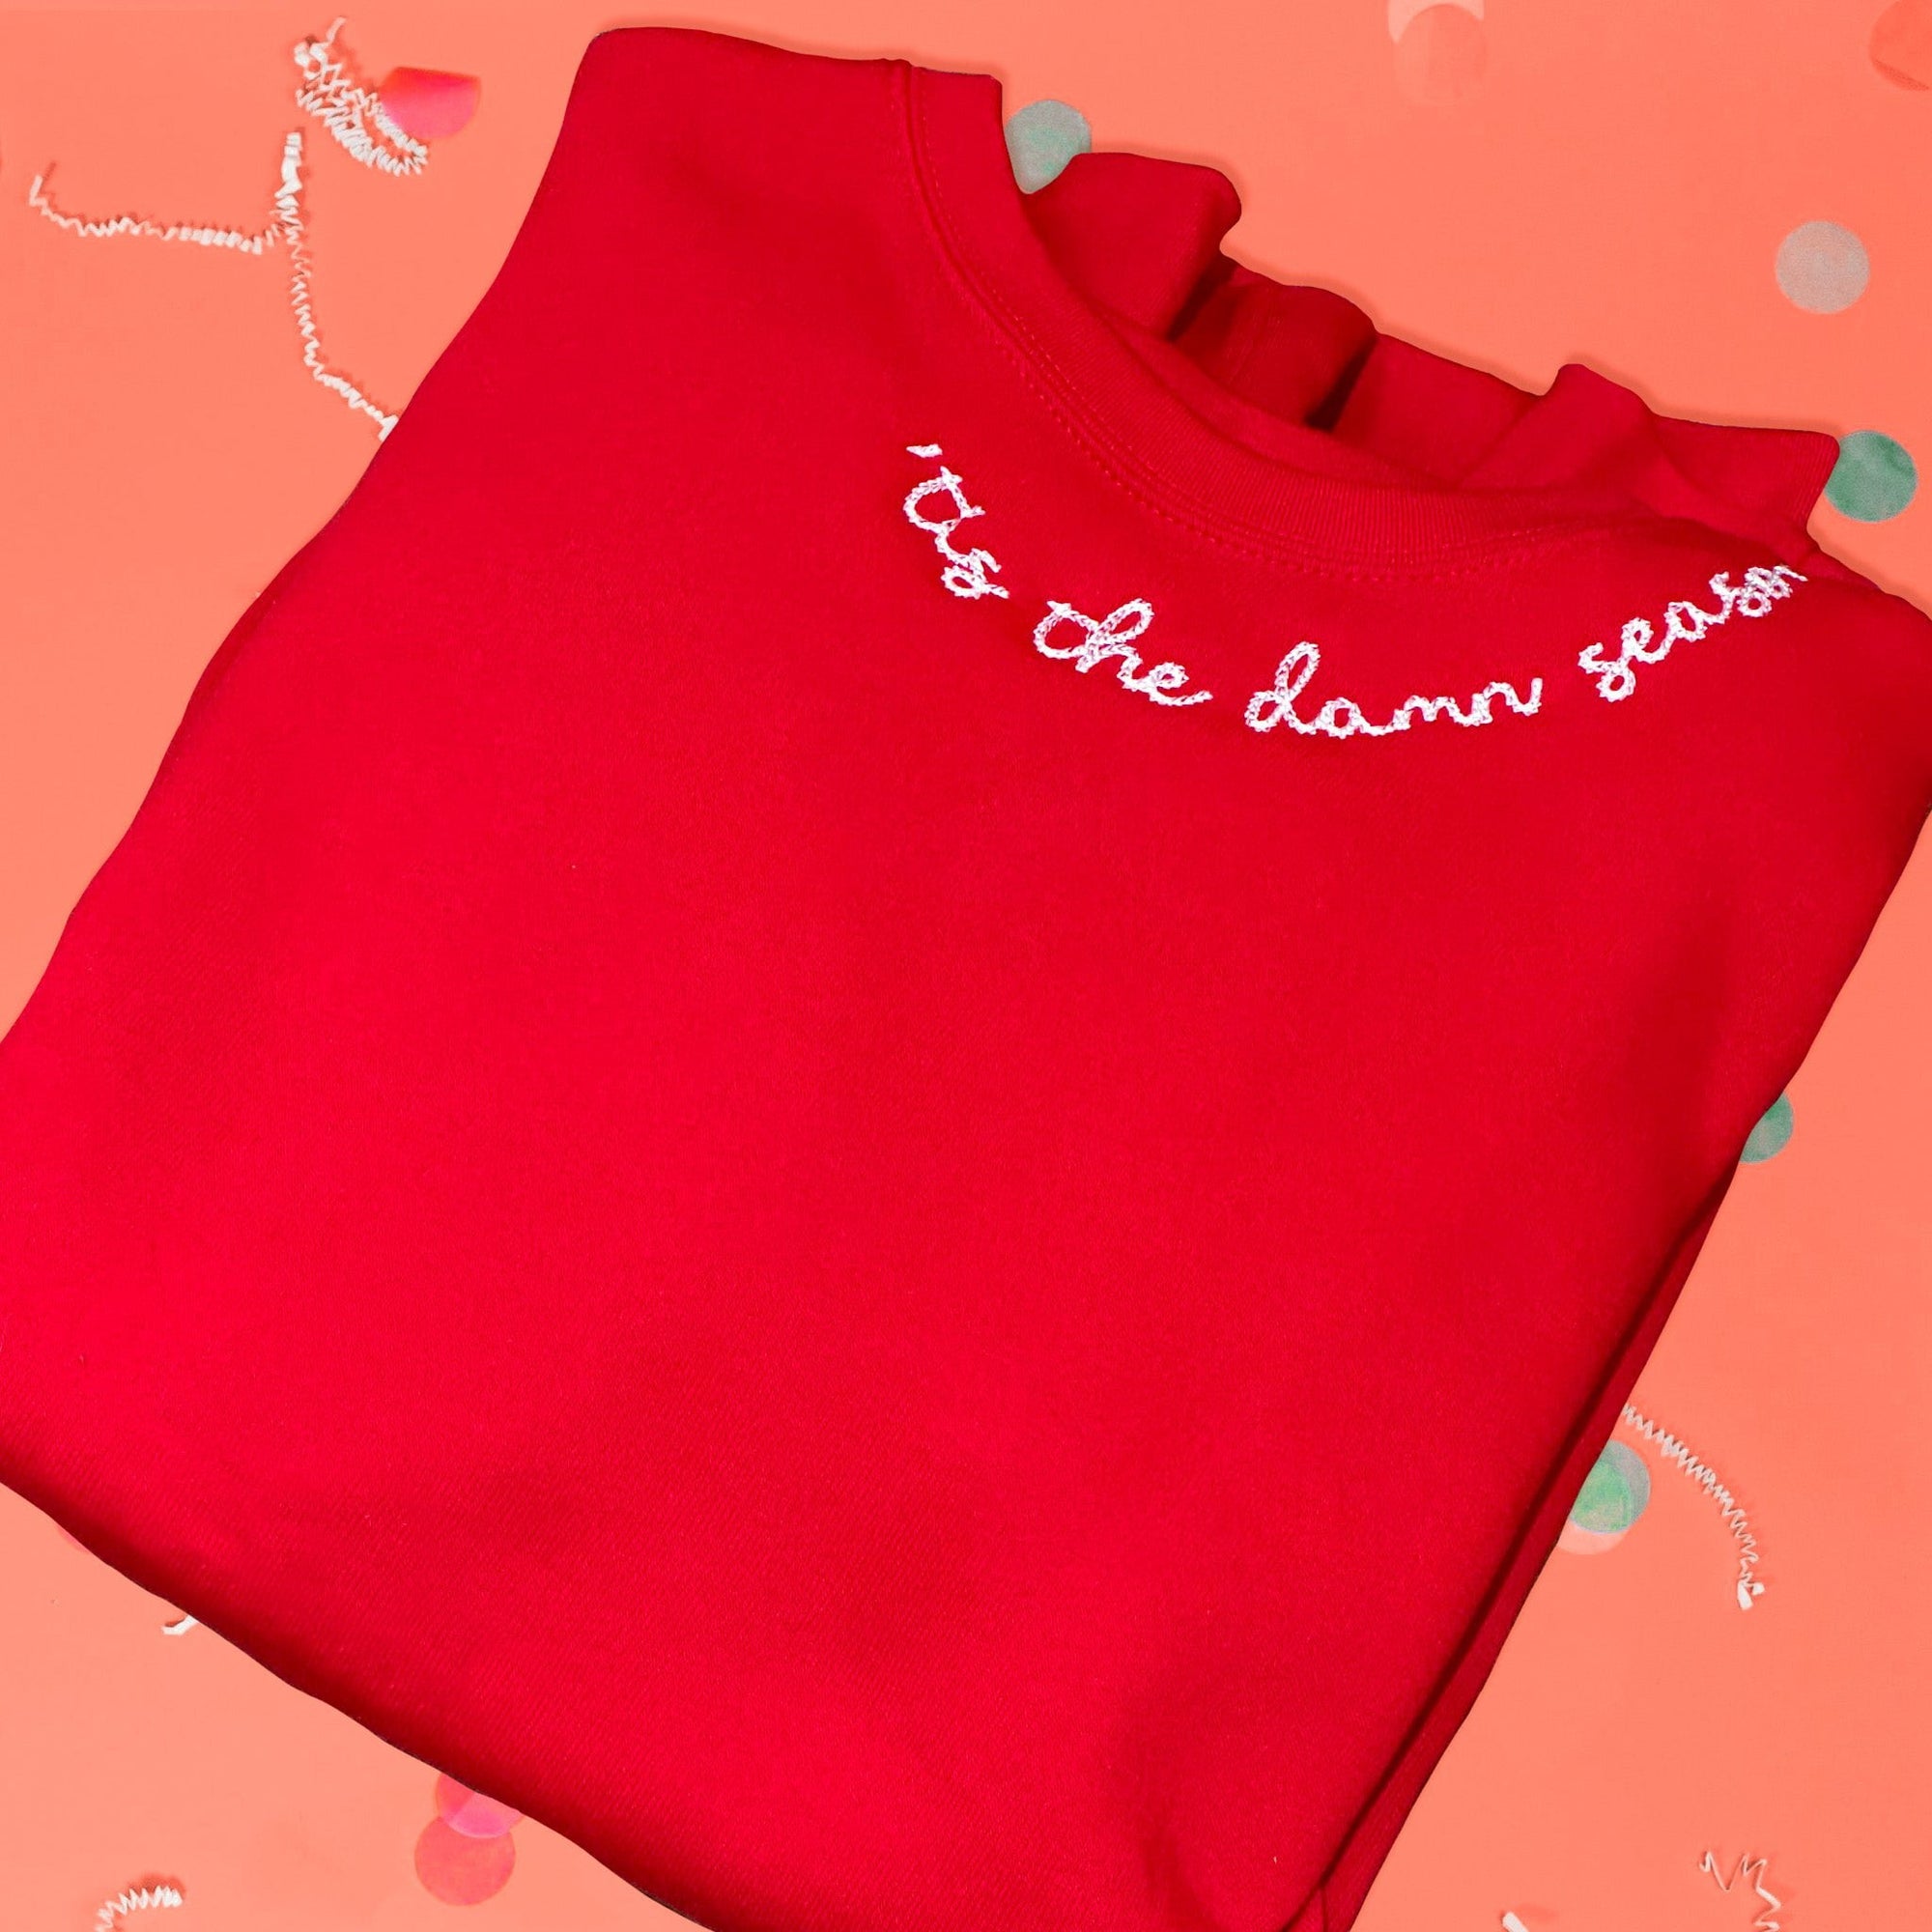 On a pink coral background sits the front of a sweatshirt with white crinkle and big, colorful confetti scattered around. This Taylor Swift Inspired crewneck red sweatshirt has white chain stitched script lettering around the neck and it says "'tis the damn season."